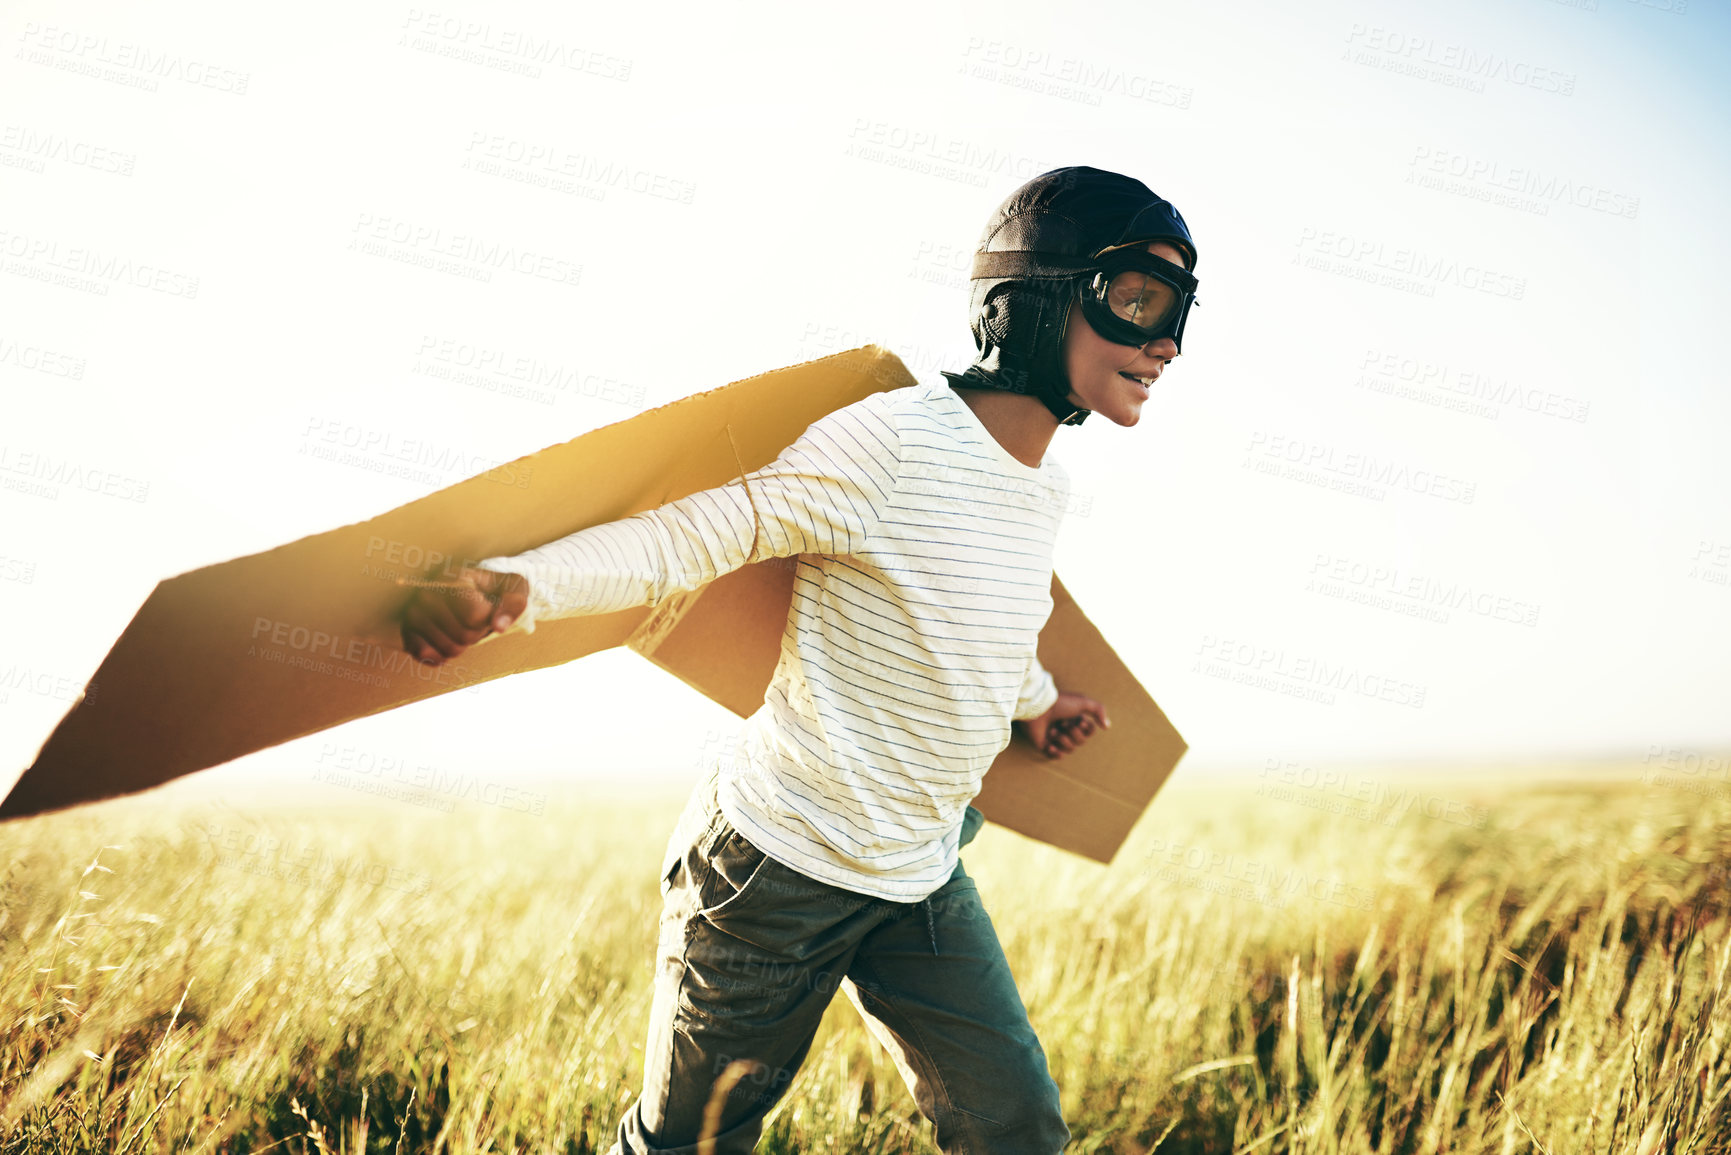 Buy stock photo Shot of a young boy pretending to fly with a pair of cardboard wings in an open field